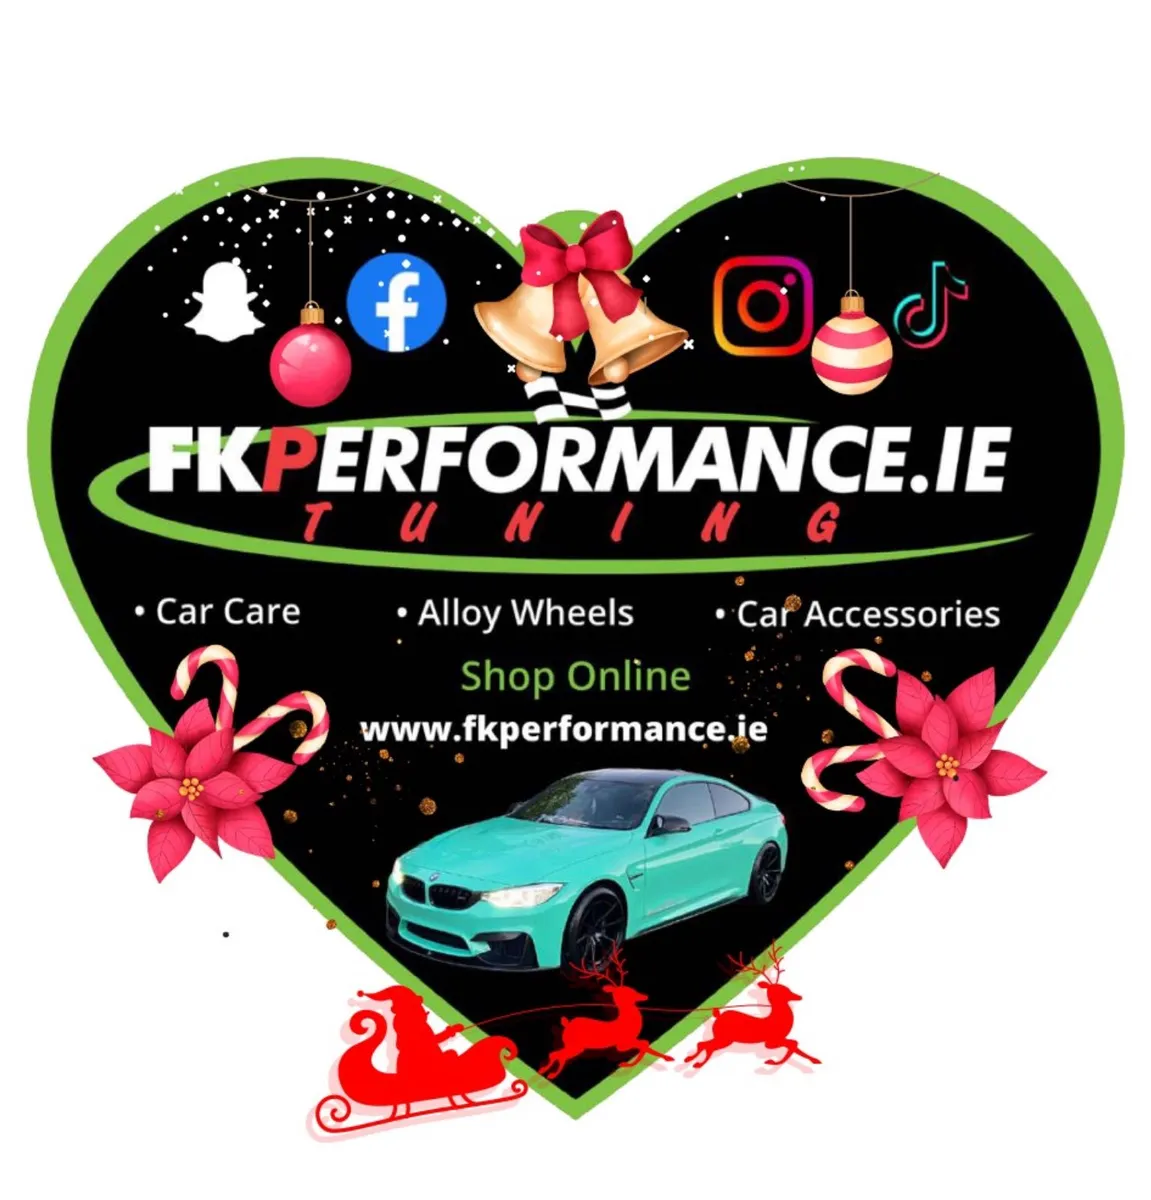 Ultimate gift ideas at fk performance